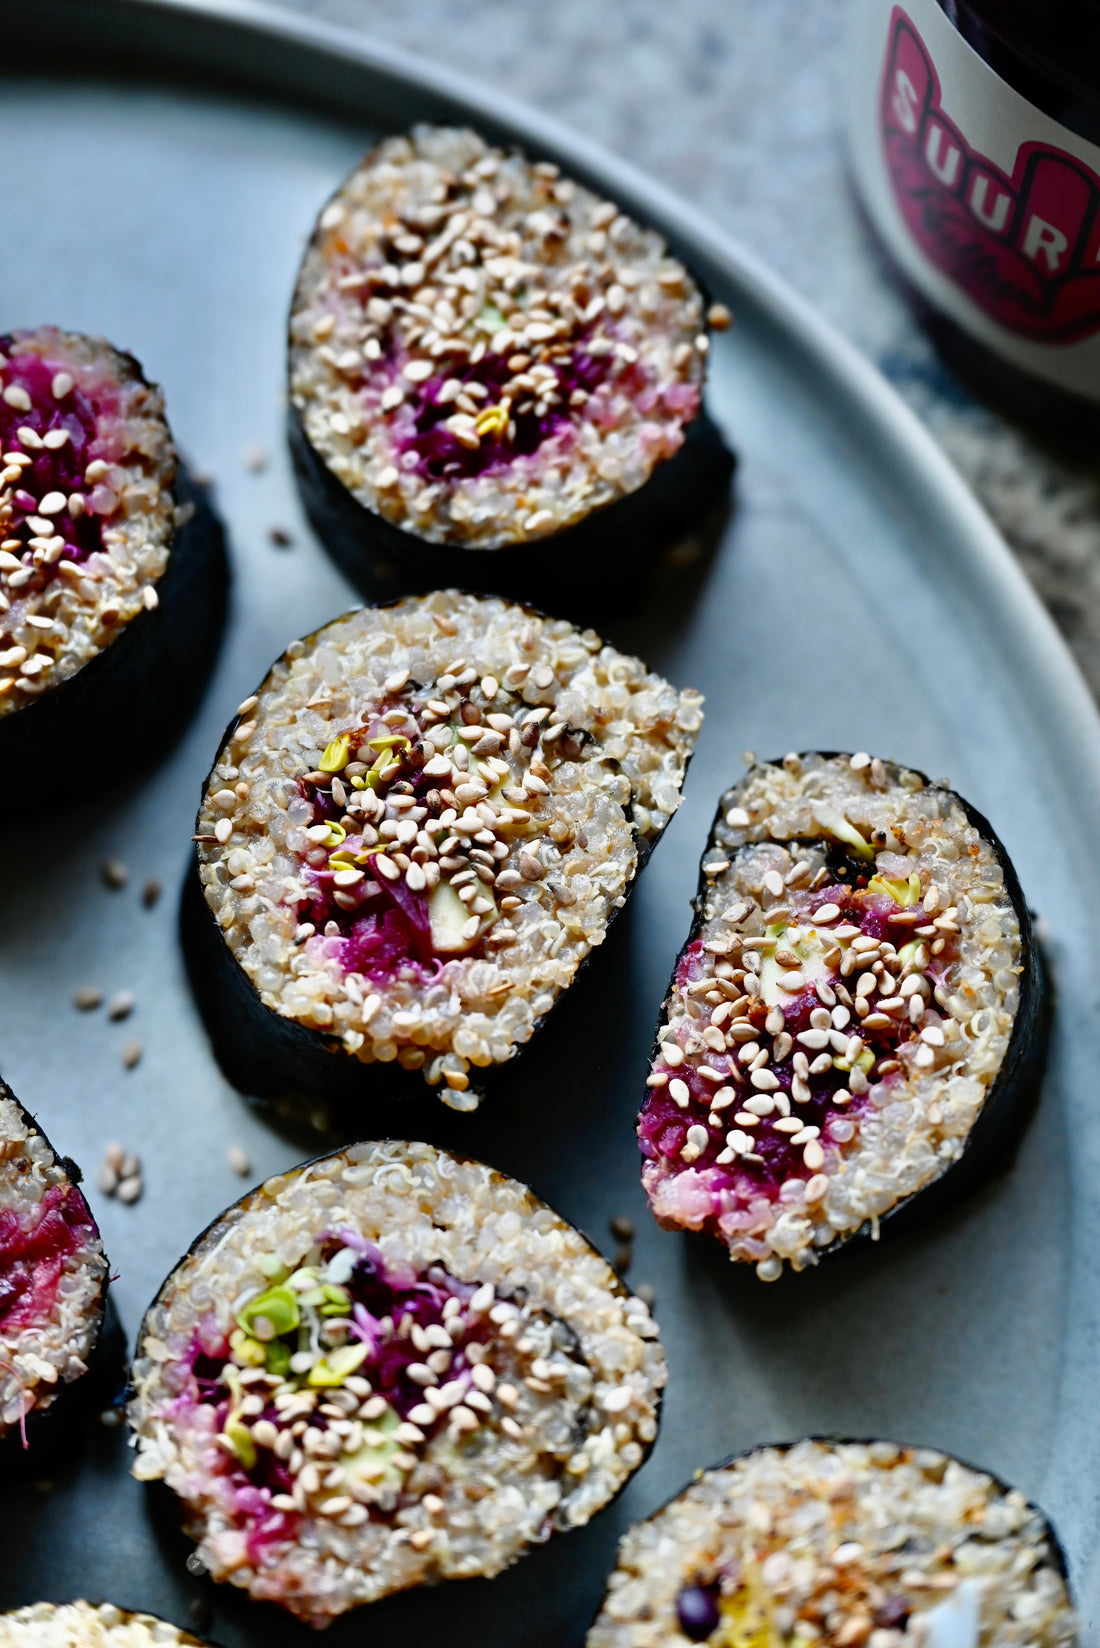 SUSHI-INSPIRED SPRING QUINOA ROLL WITH LOVE CRAFT KRAUT